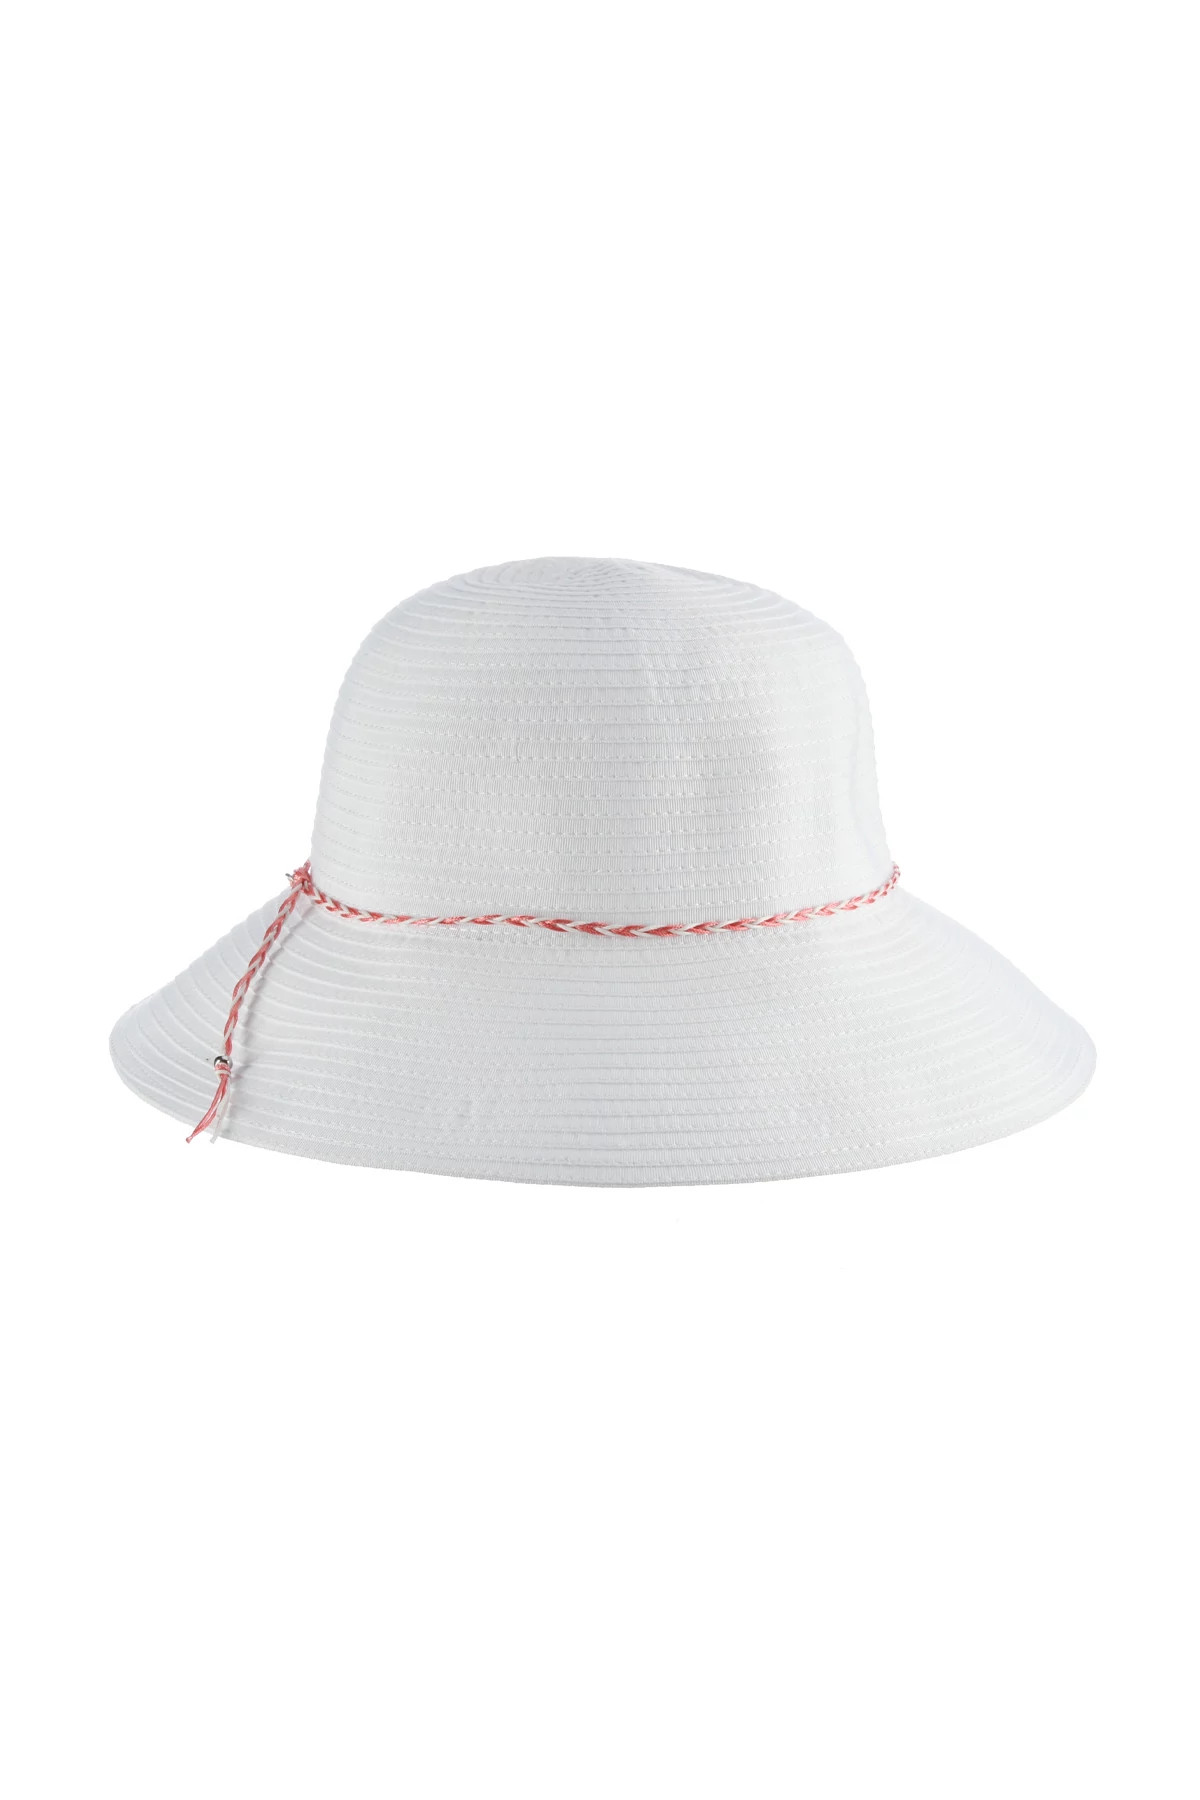 WHITE Ribbon Cord Bucket Hat image number 1